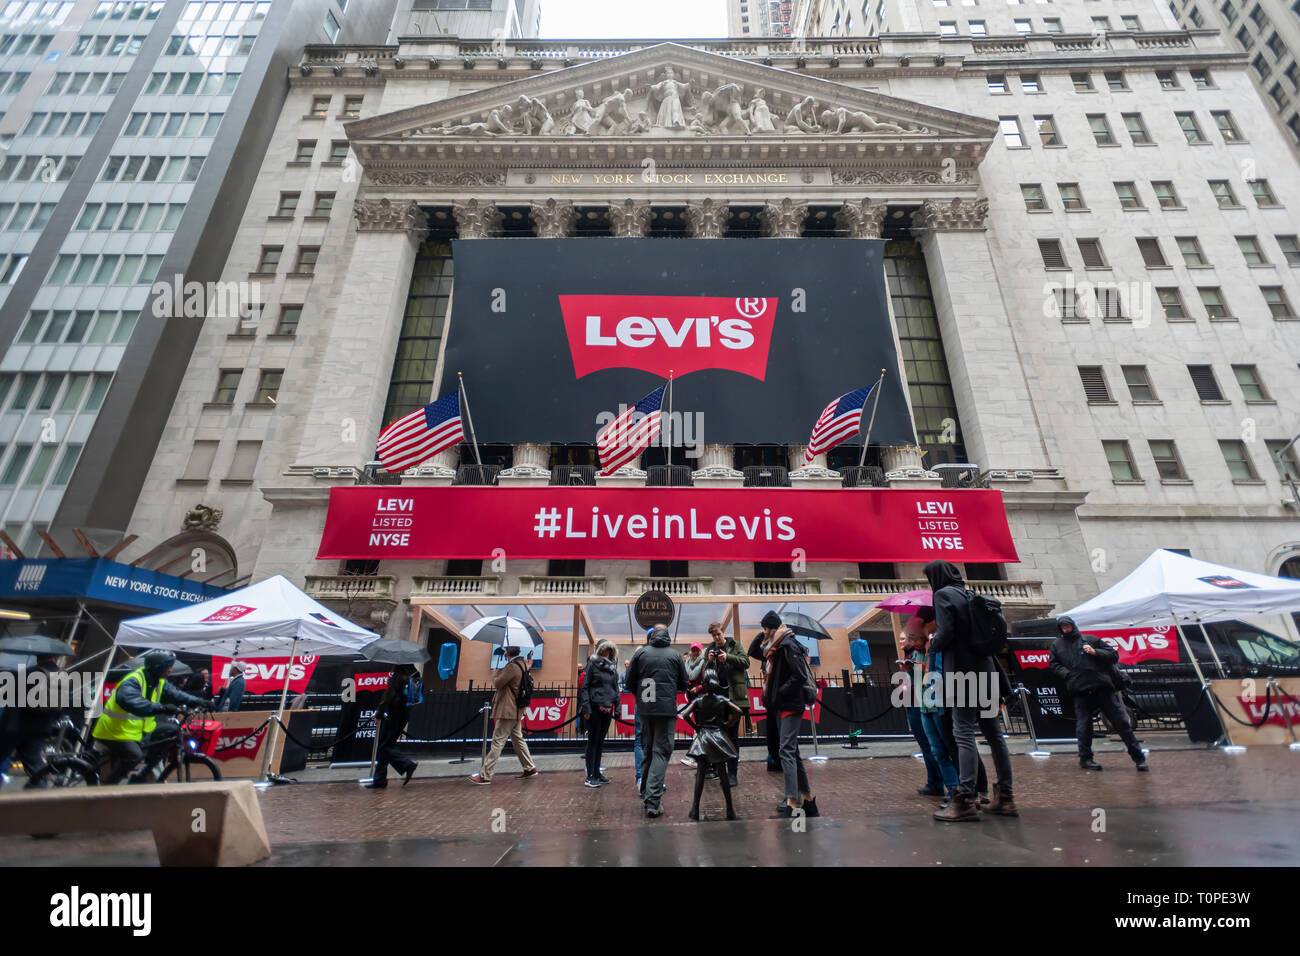 Lower Manhattan, New York, USA. 21st Mar 2019. The New York Stock Exchange  in Lower Manhattan is decorated for the first day of trading for the Levi  Strauss & Co. initial public